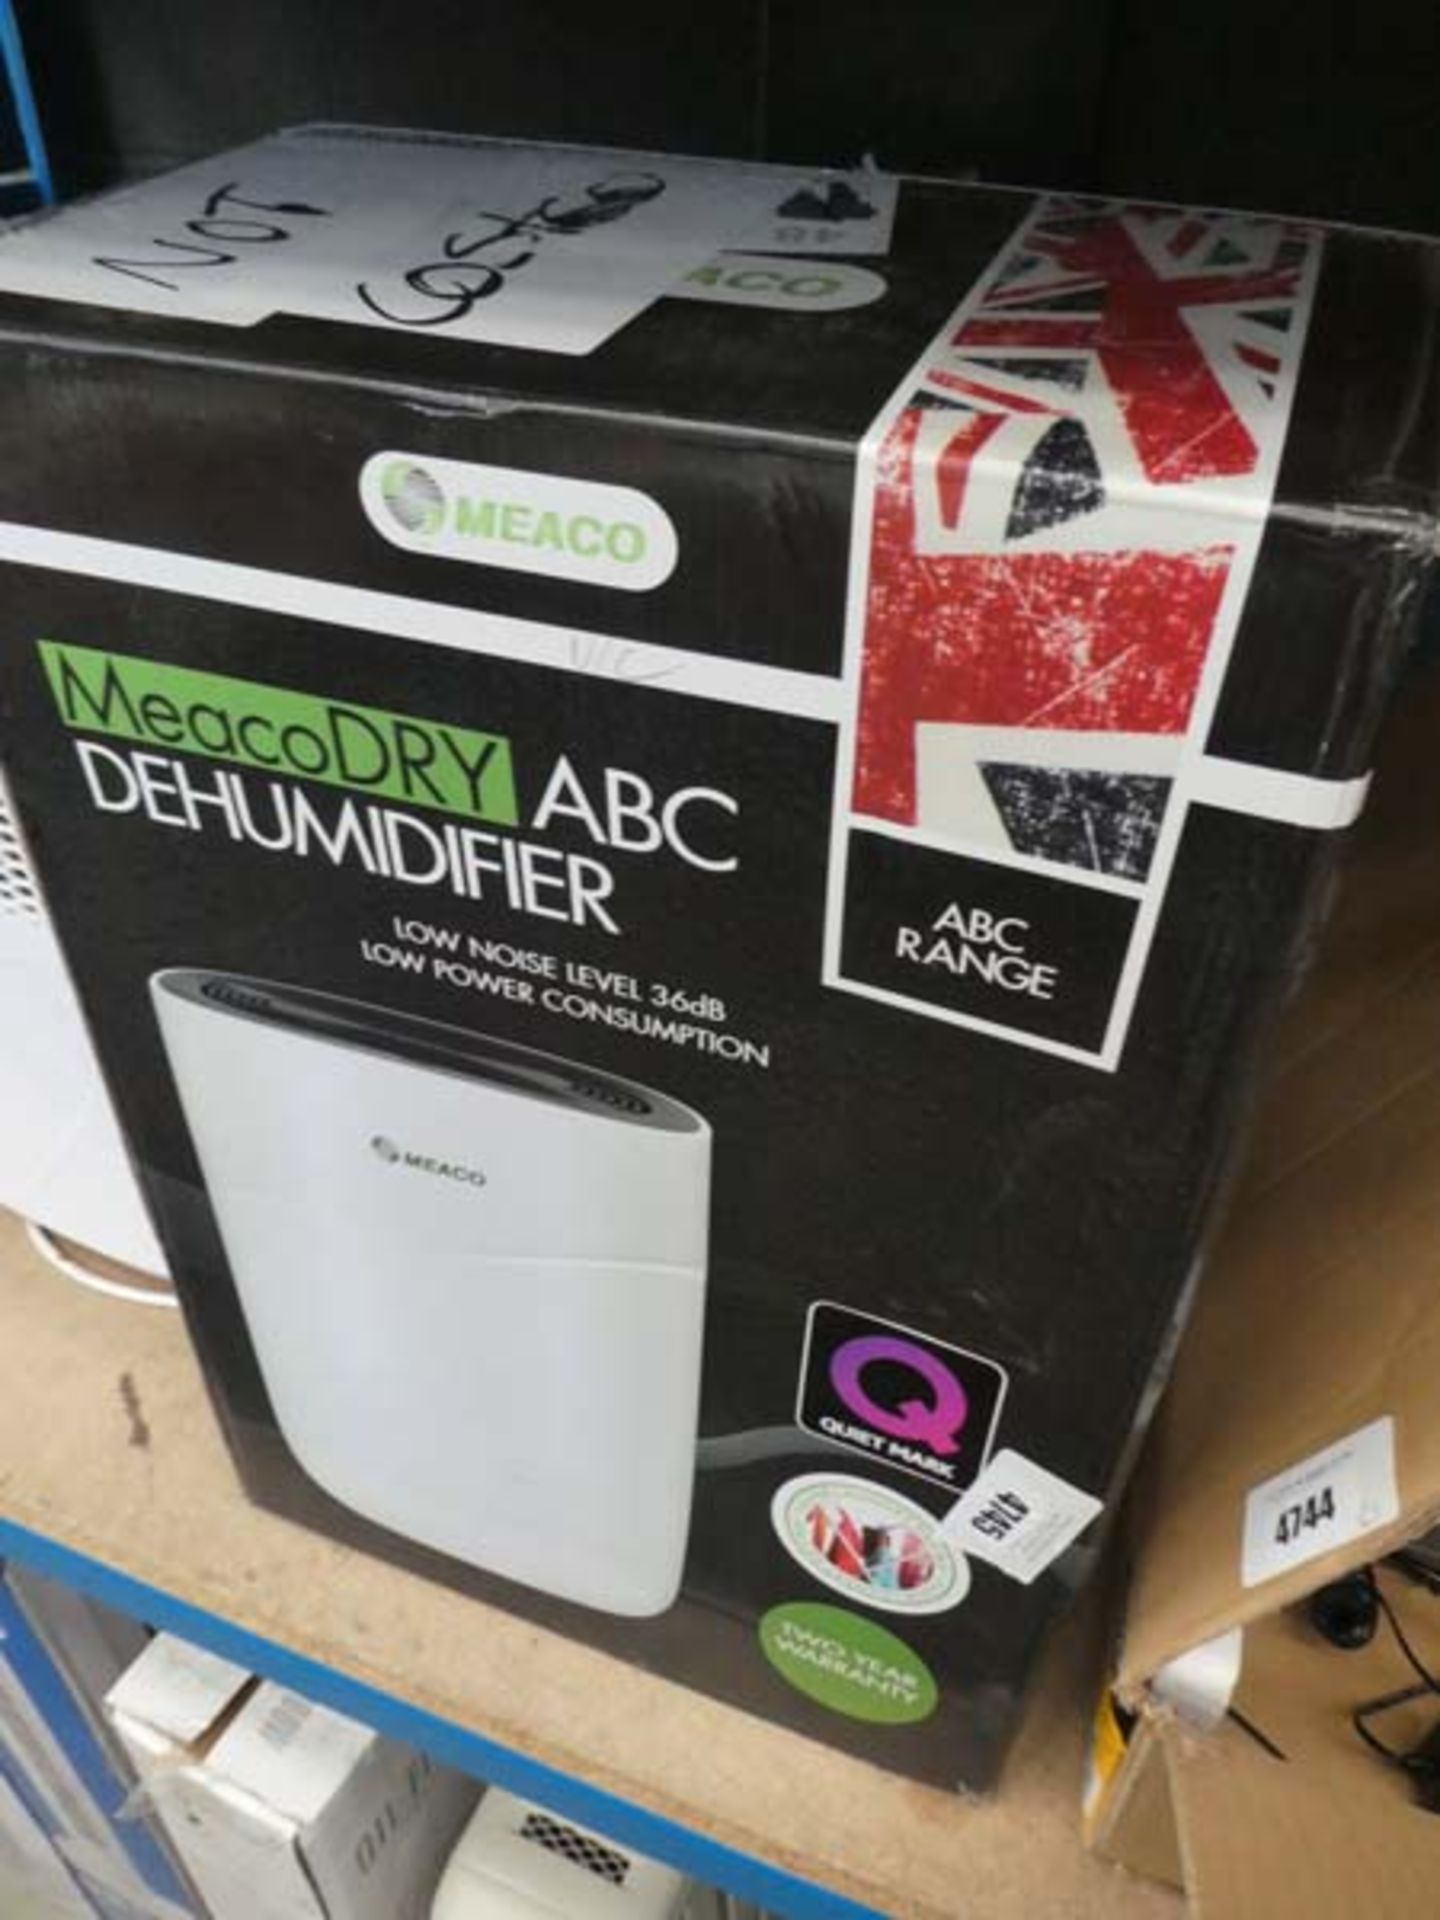 Boxed ABCD humidifier